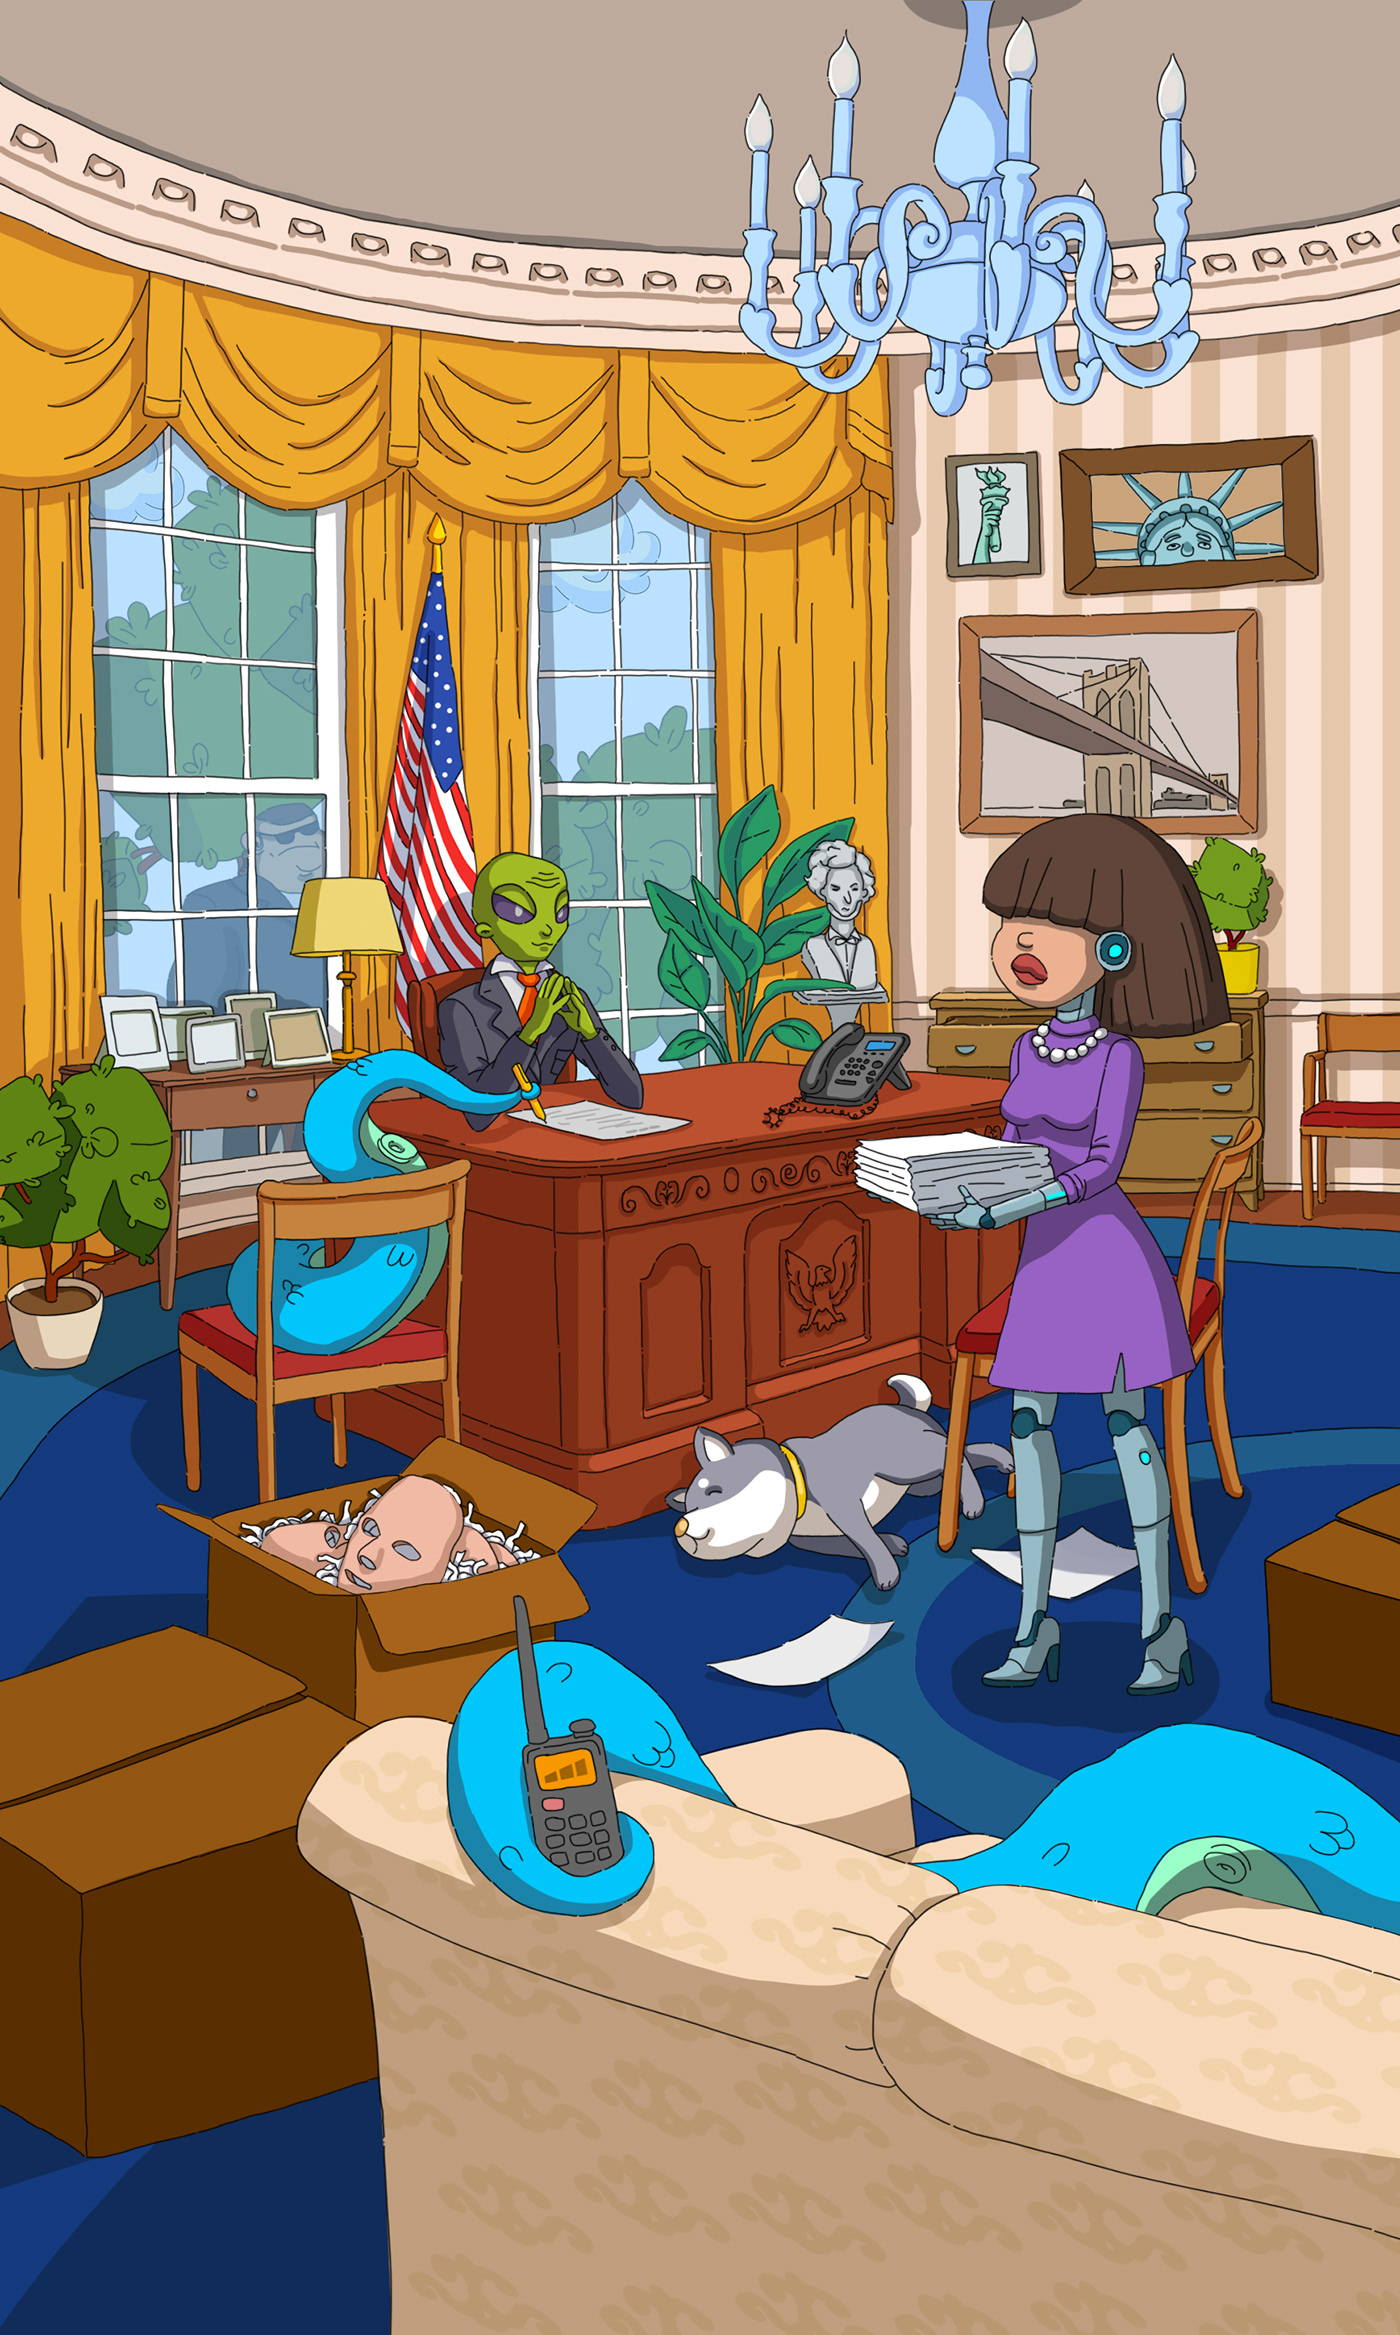 White House artwork Character design  Character Digital Art  cartoon concept art american flag Oval Office united states